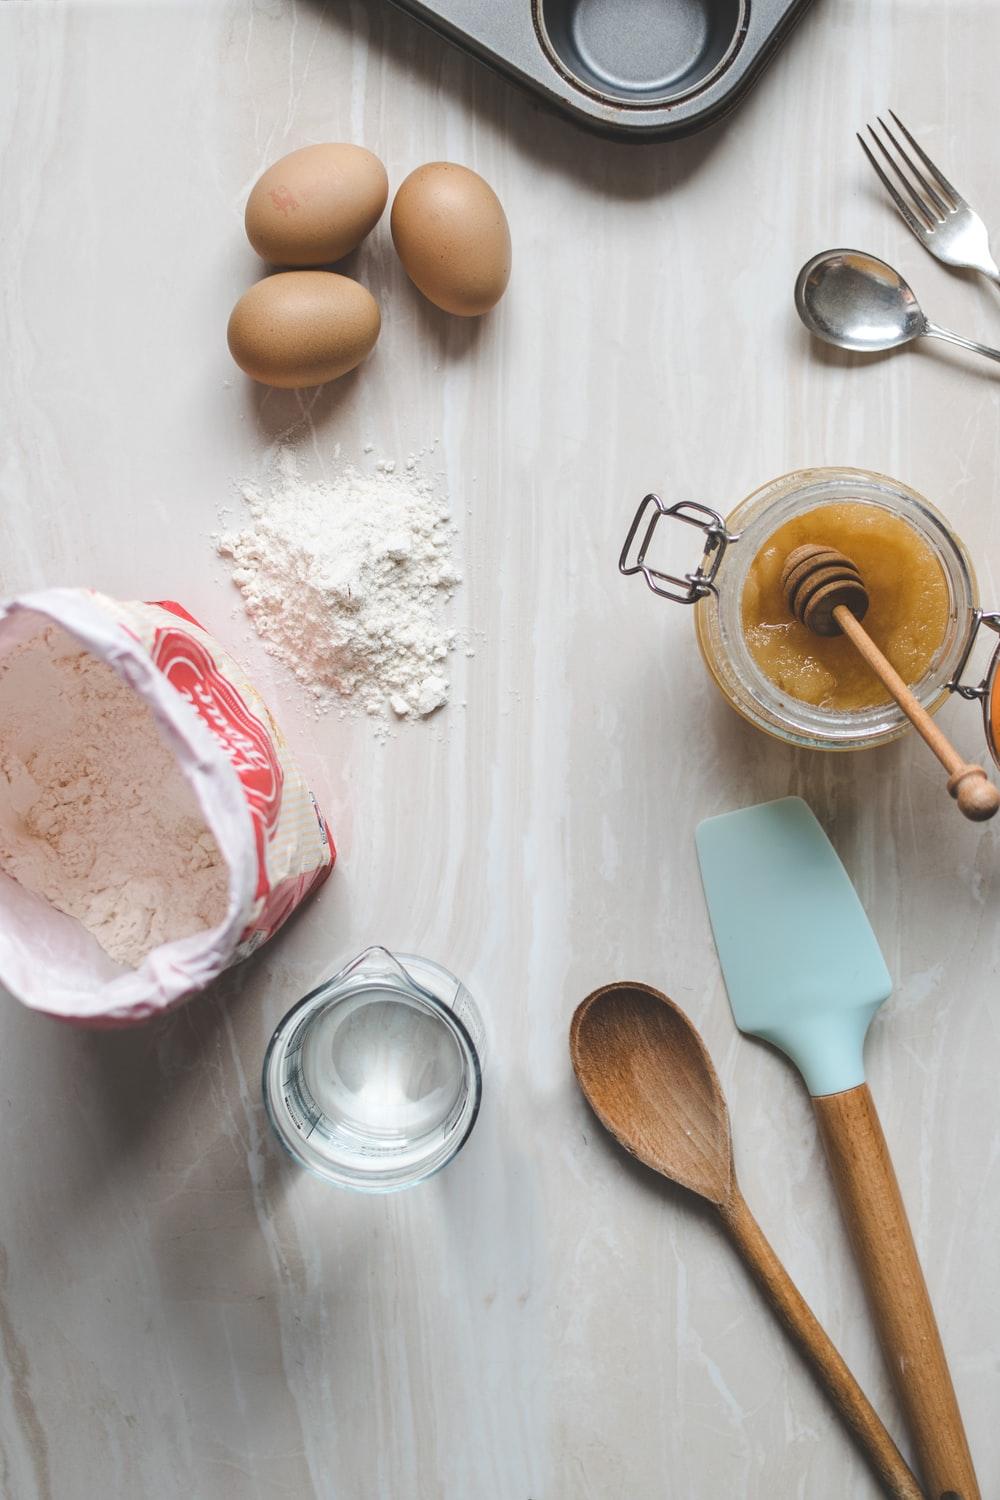 Baking Picture. Download Free Image